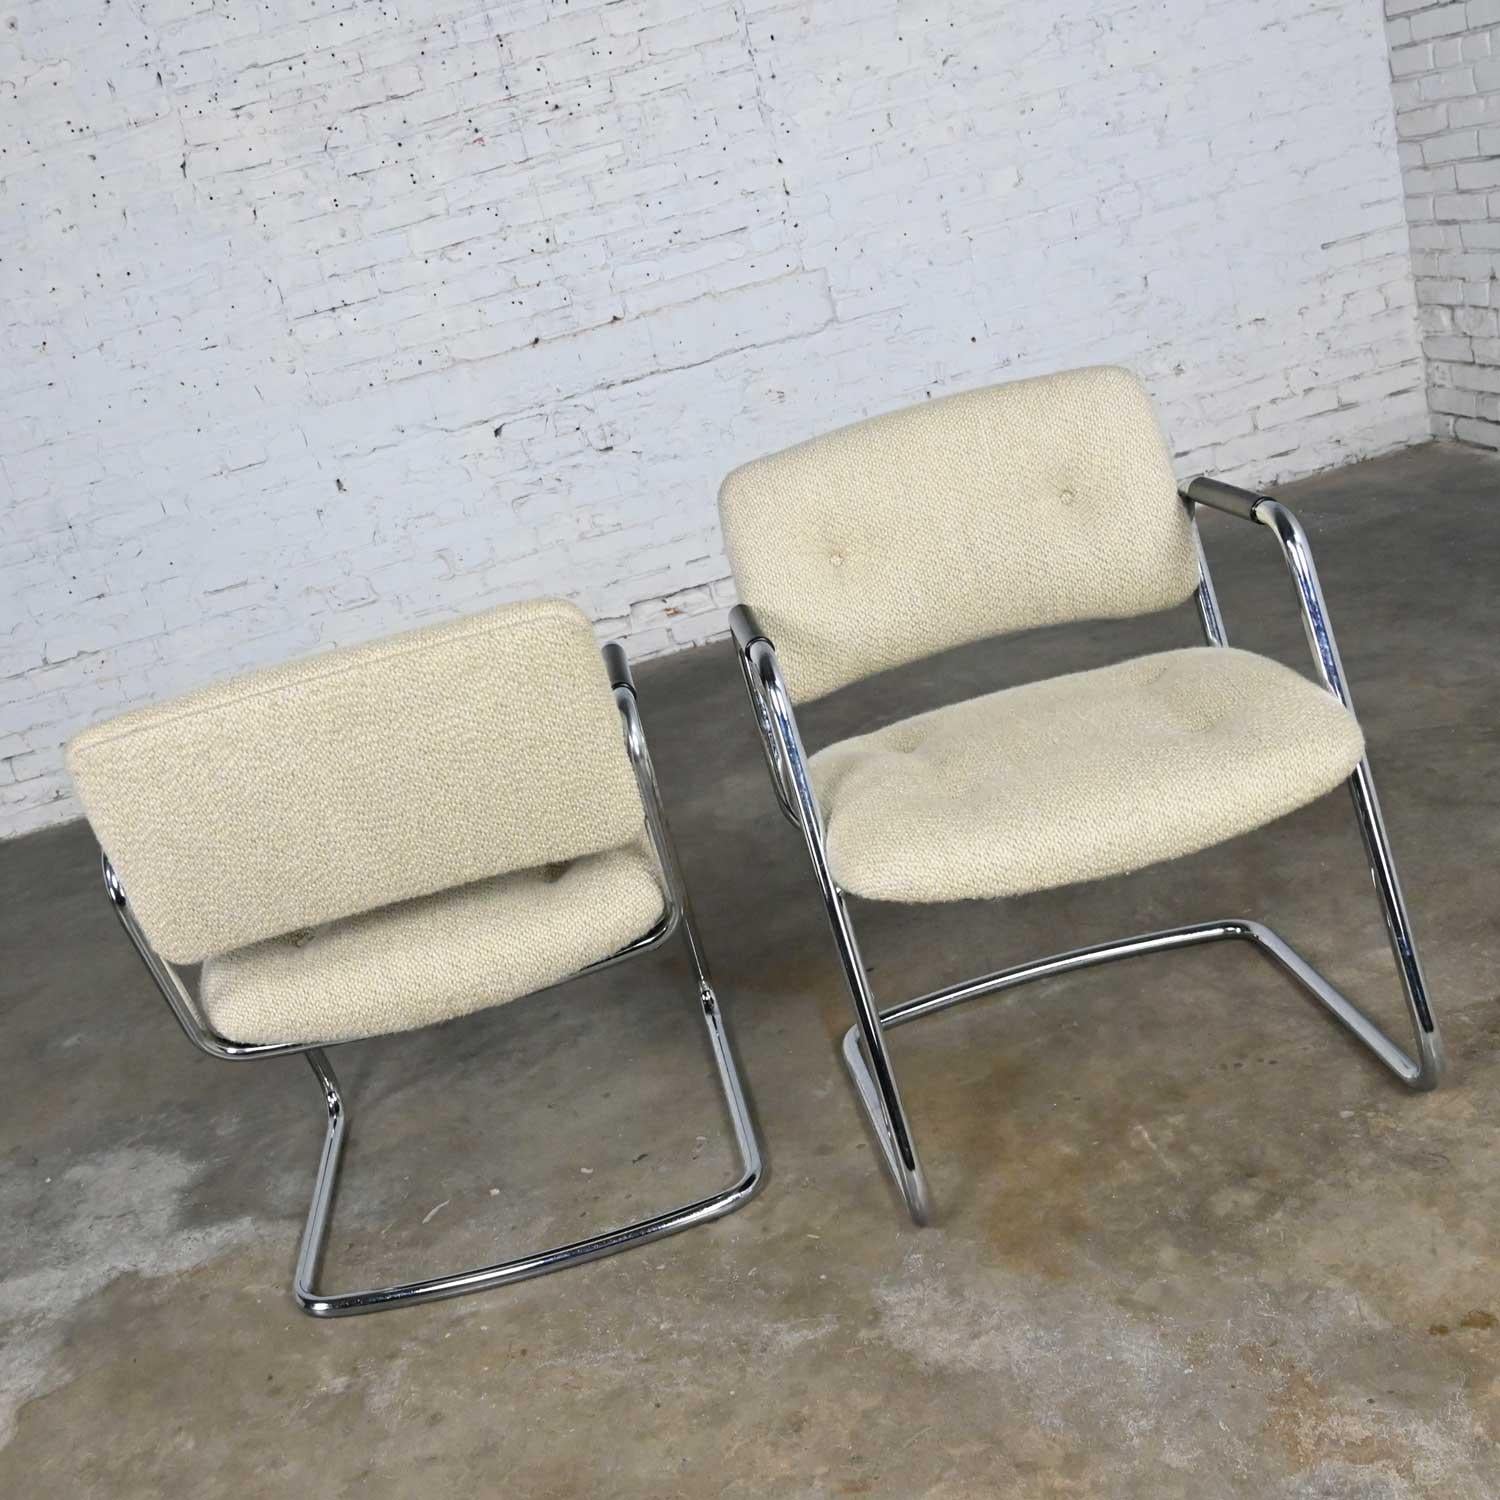 Fabric Pair Modern Chrome Cantilever Chairs Oatmeal Hopsacking Steelcase Model 421 482 For Sale